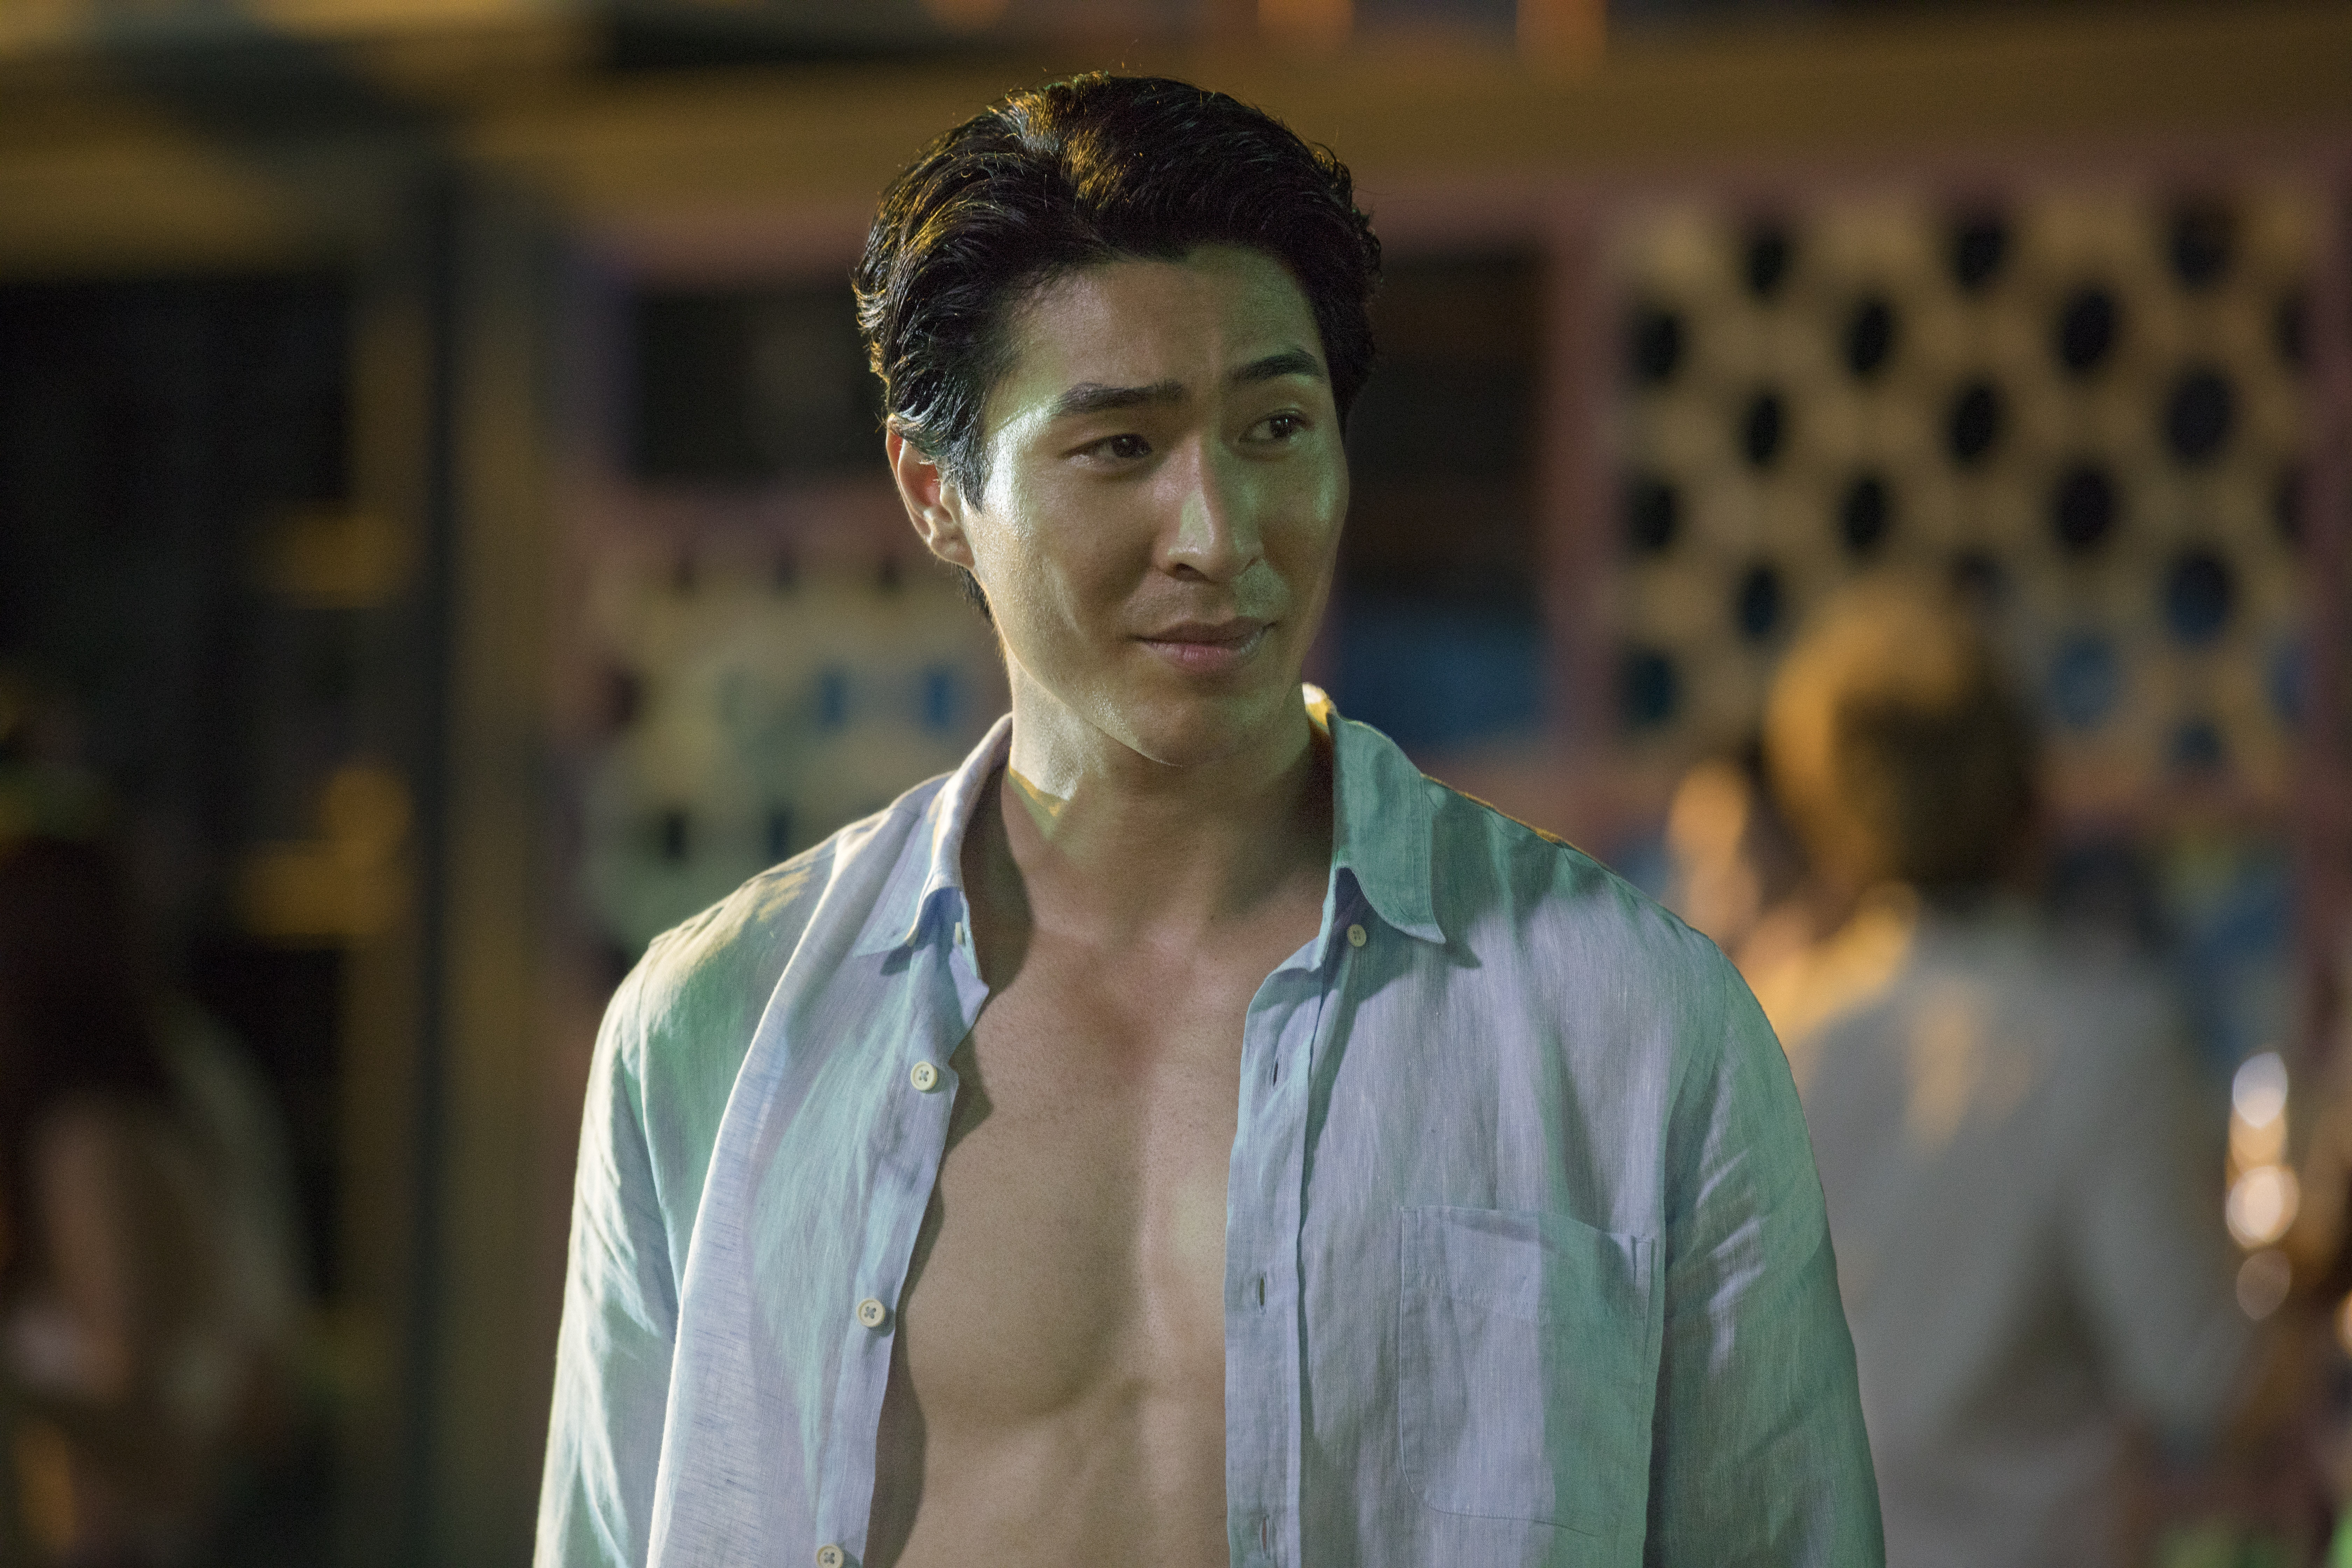 Suave-looking Chris Pang with his blue shirt unbuttoned